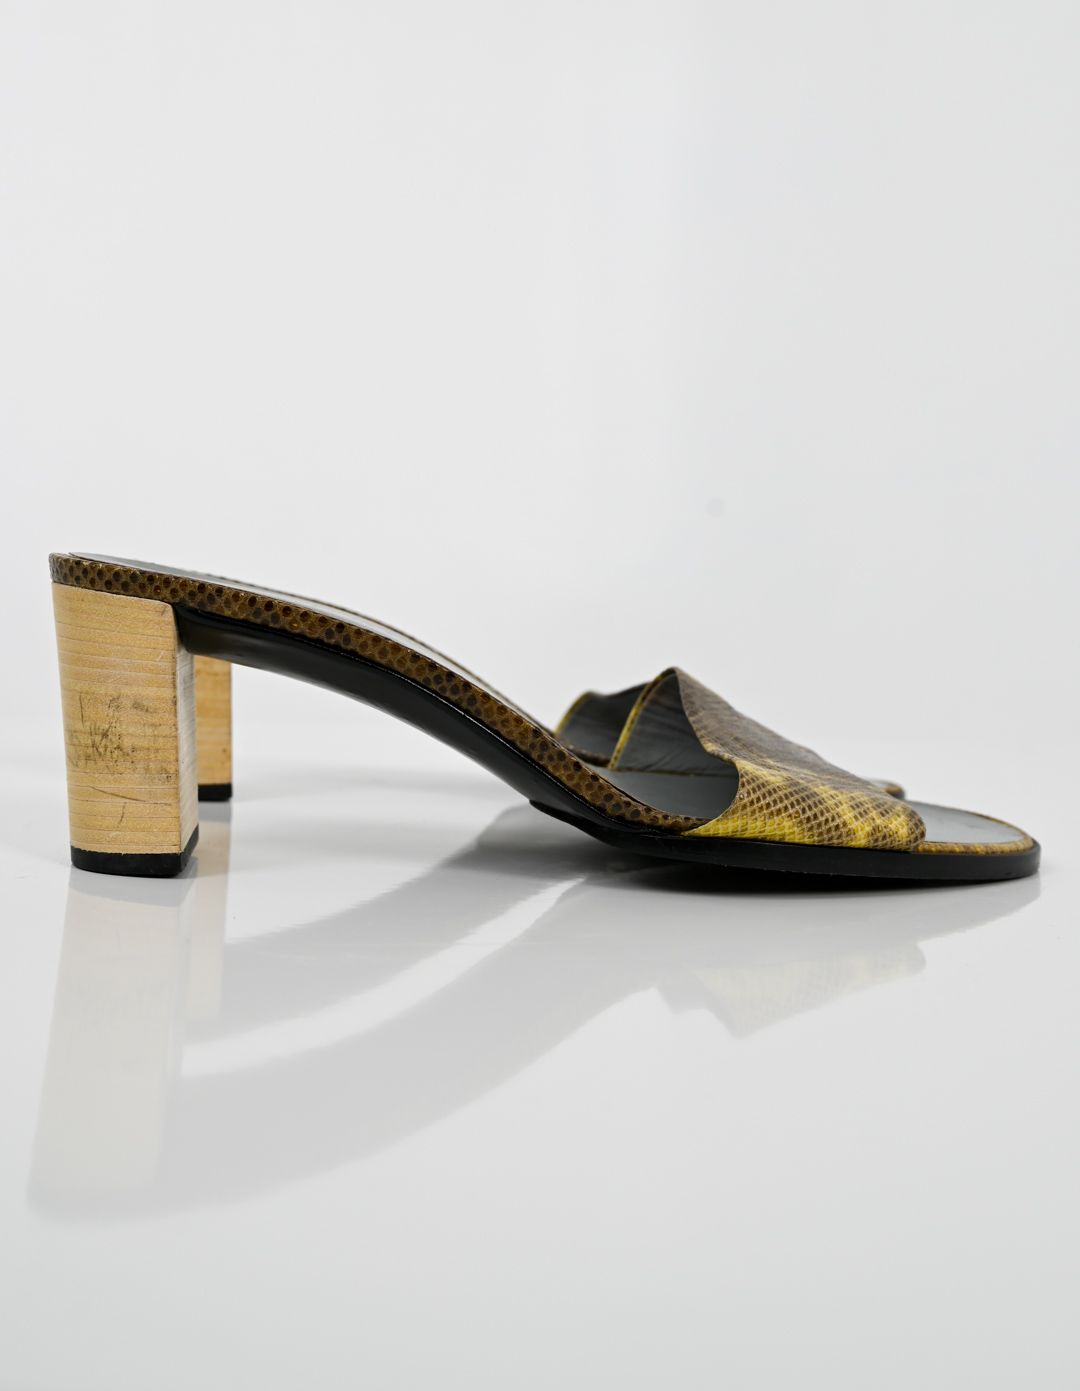 Gucci Canary Snakeskin Sandals (40) - 3